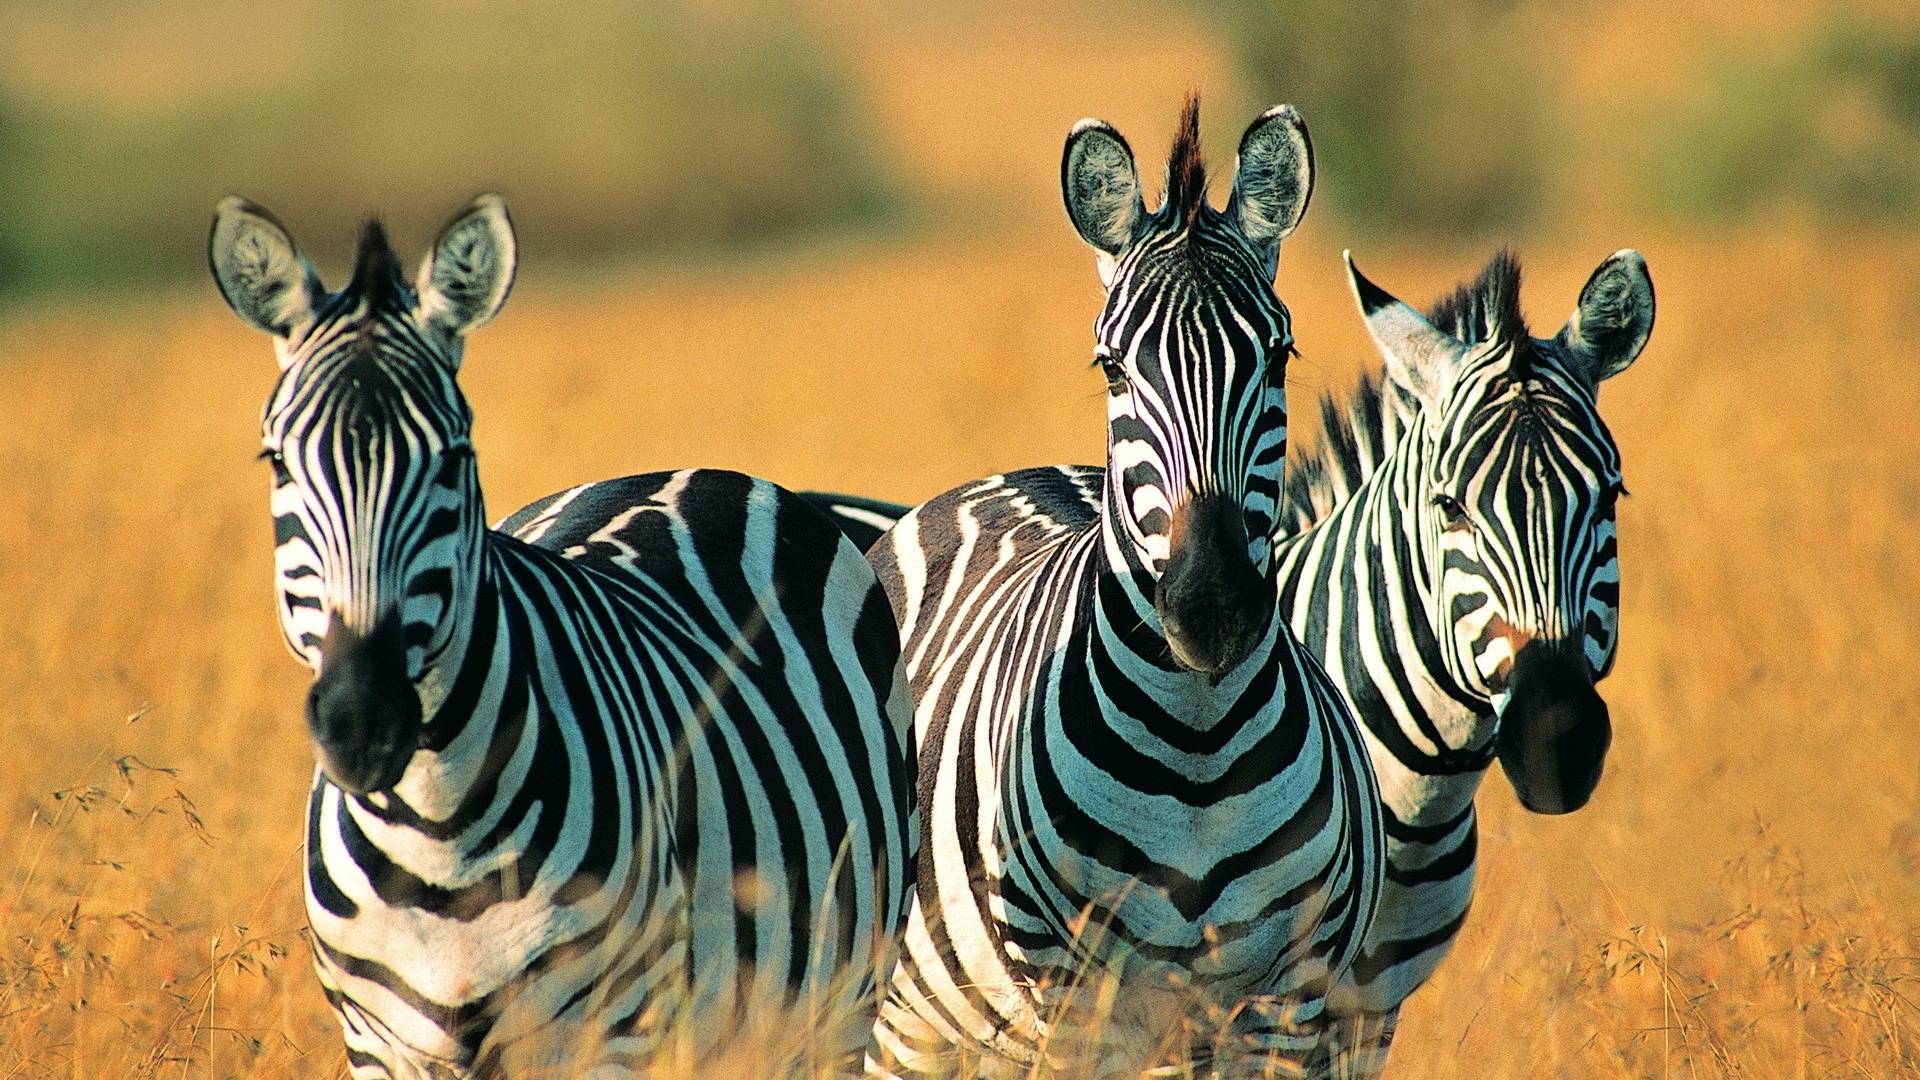 Black and white striped animal, zebra HD wallpapers #3 - 1920x1080